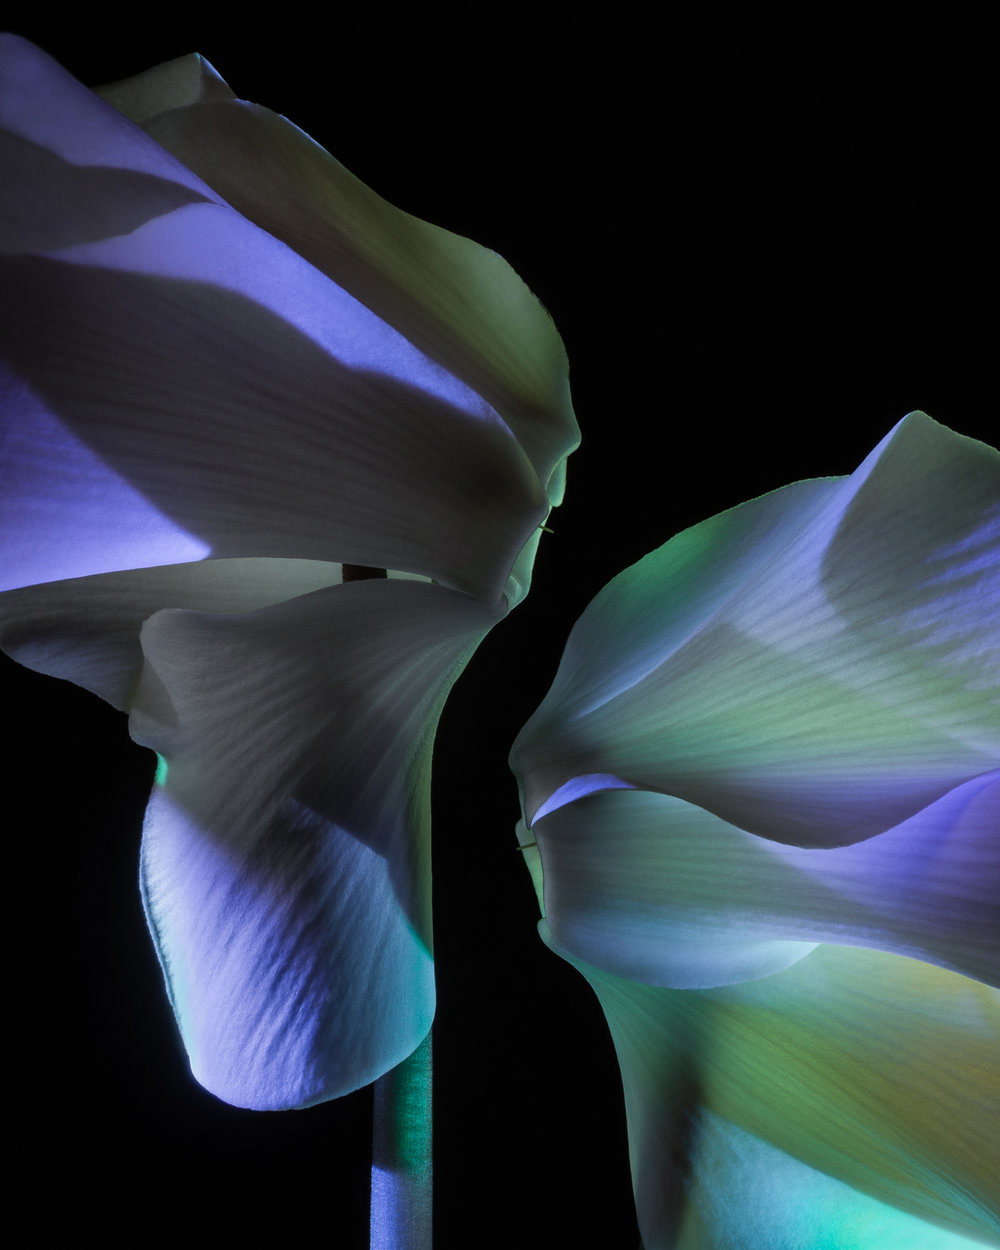 The Conversation: White Cyclamen in Spectral Light From a Prism, © Elizabeth A Kazda, 2nd Abstract and Details Category, RHS Photographic Competition